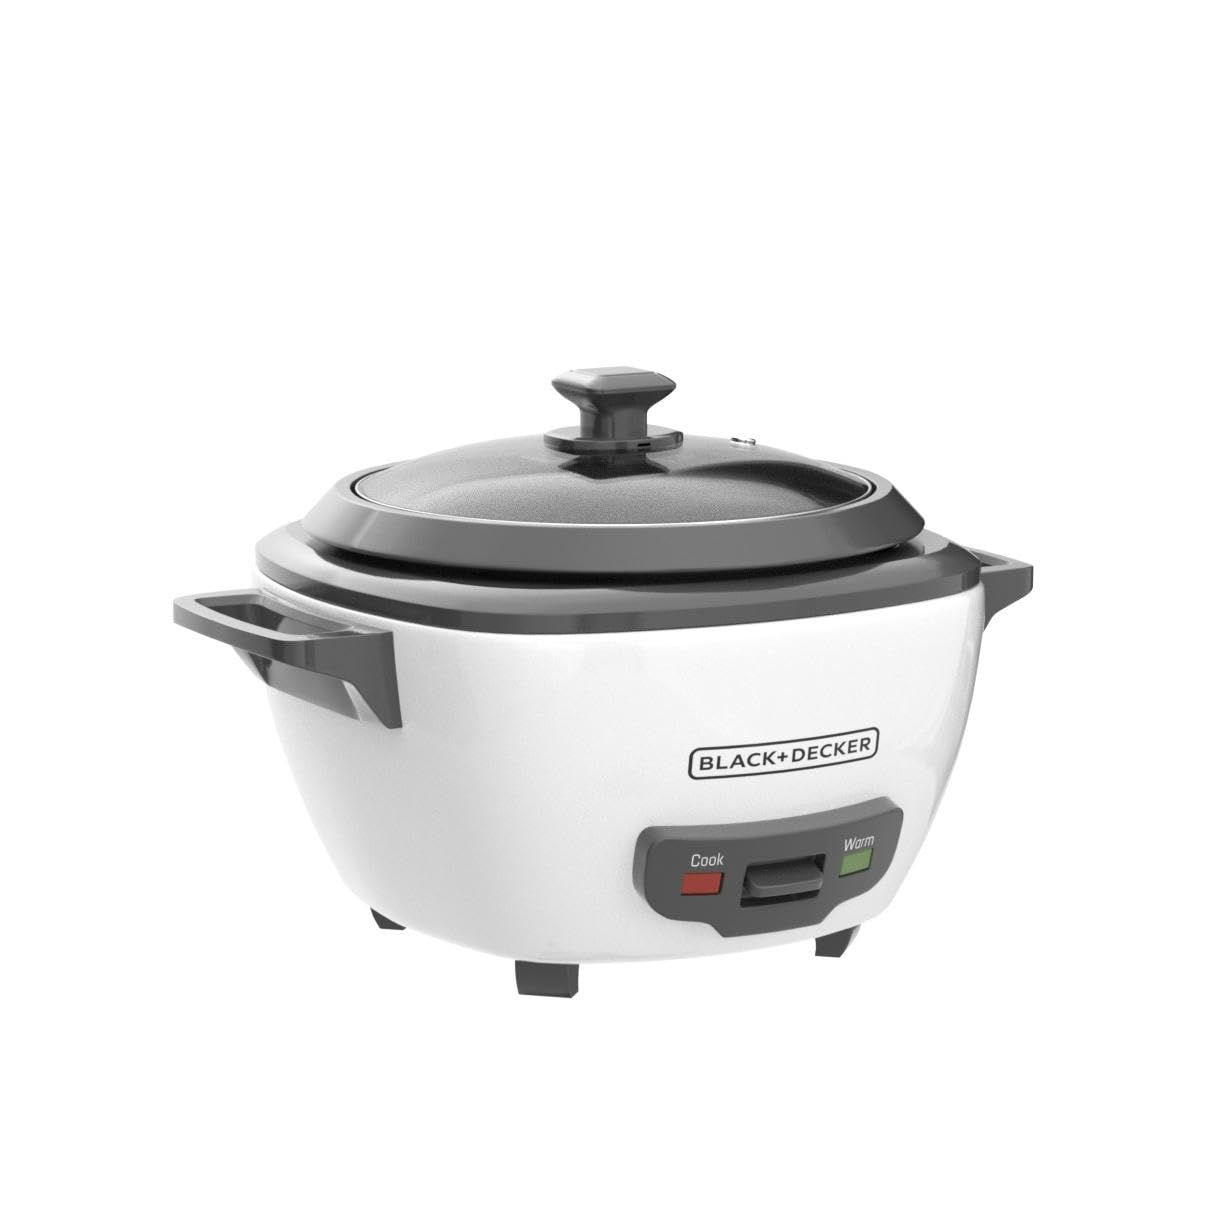 BLACK+DECKER 6-Cup Rice Cooker, RC506, 3-cup Uncooked Rice, Steaming Basket, Removable Non-Stick Bowl, One Touch